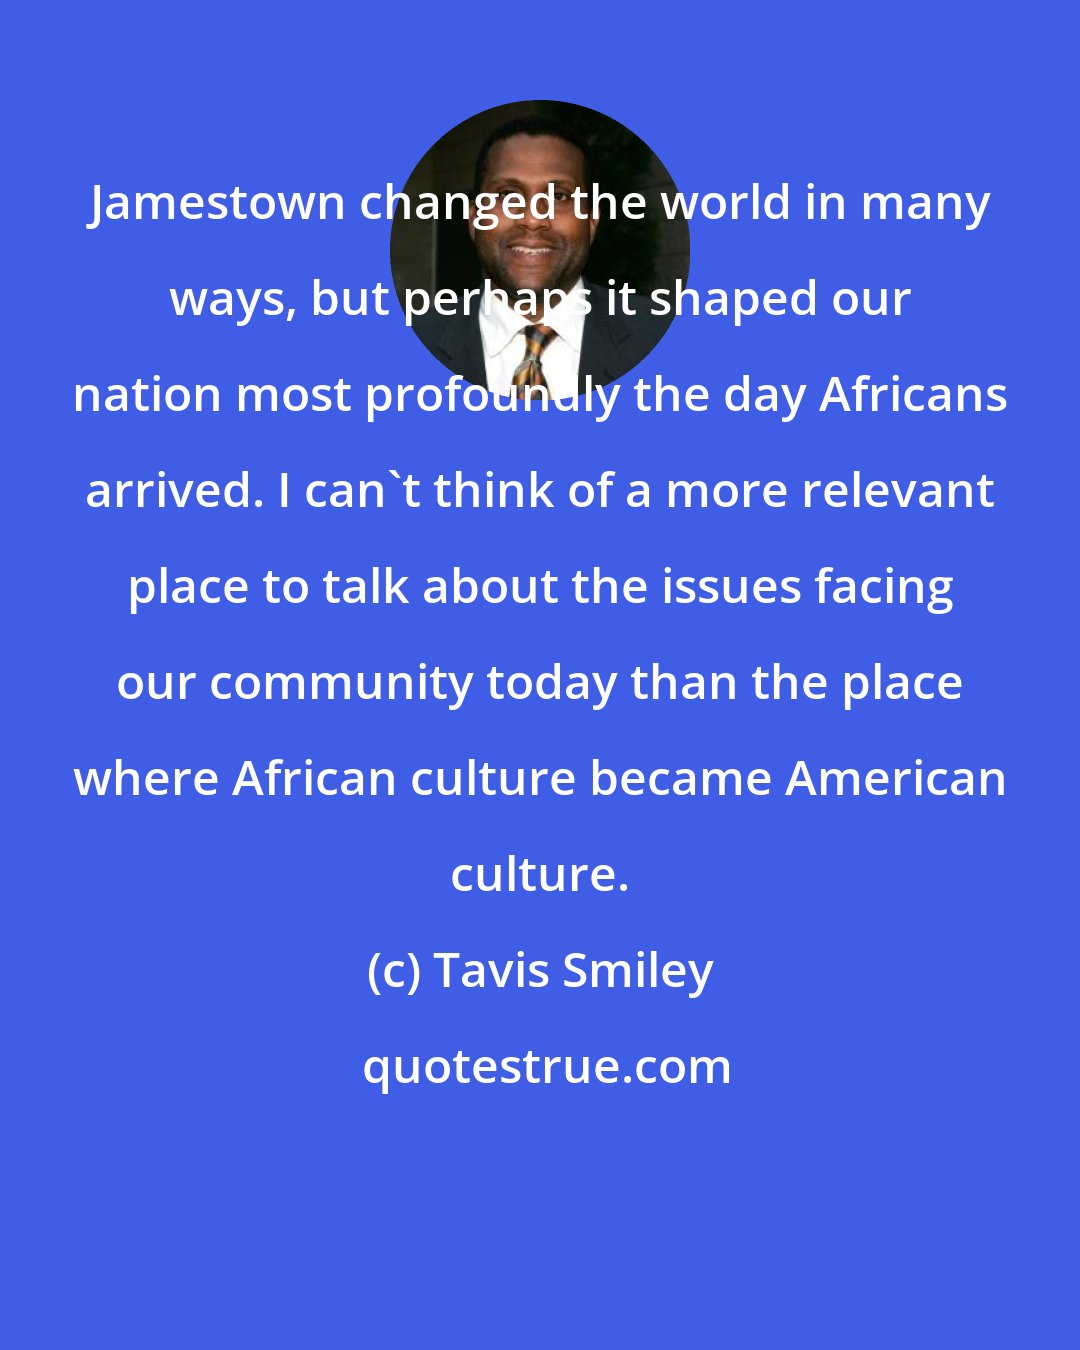 Tavis Smiley: Jamestown changed the world in many ways, but perhaps it shaped our nation most profoundly the day Africans arrived. I can't think of a more relevant place to talk about the issues facing our community today than the place where African culture became American culture.